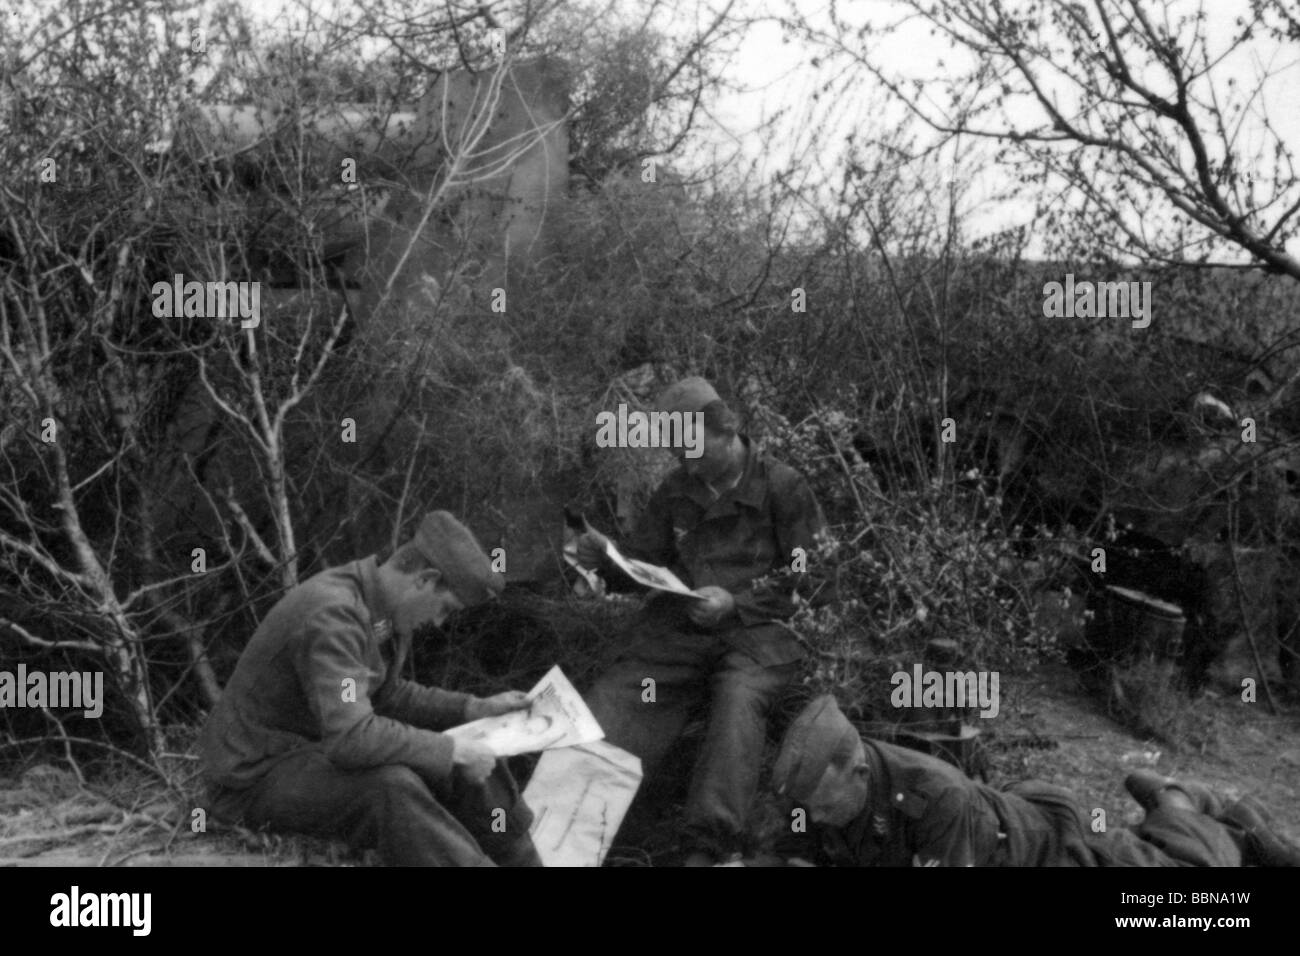 events, Second World War / WWII, Russia 1944 / 1945, Crimea, Sevastopol, the crew of a German 8.8 cm Flak reading newspapers, 30.4.1944, Eastern Front, USSR, Wehrmacht, 20th century, historic, historical, Soviet Union, soldiers, AA artillery, army postal service, camouflage, 88 mm, 1940s, people, Stock Photo